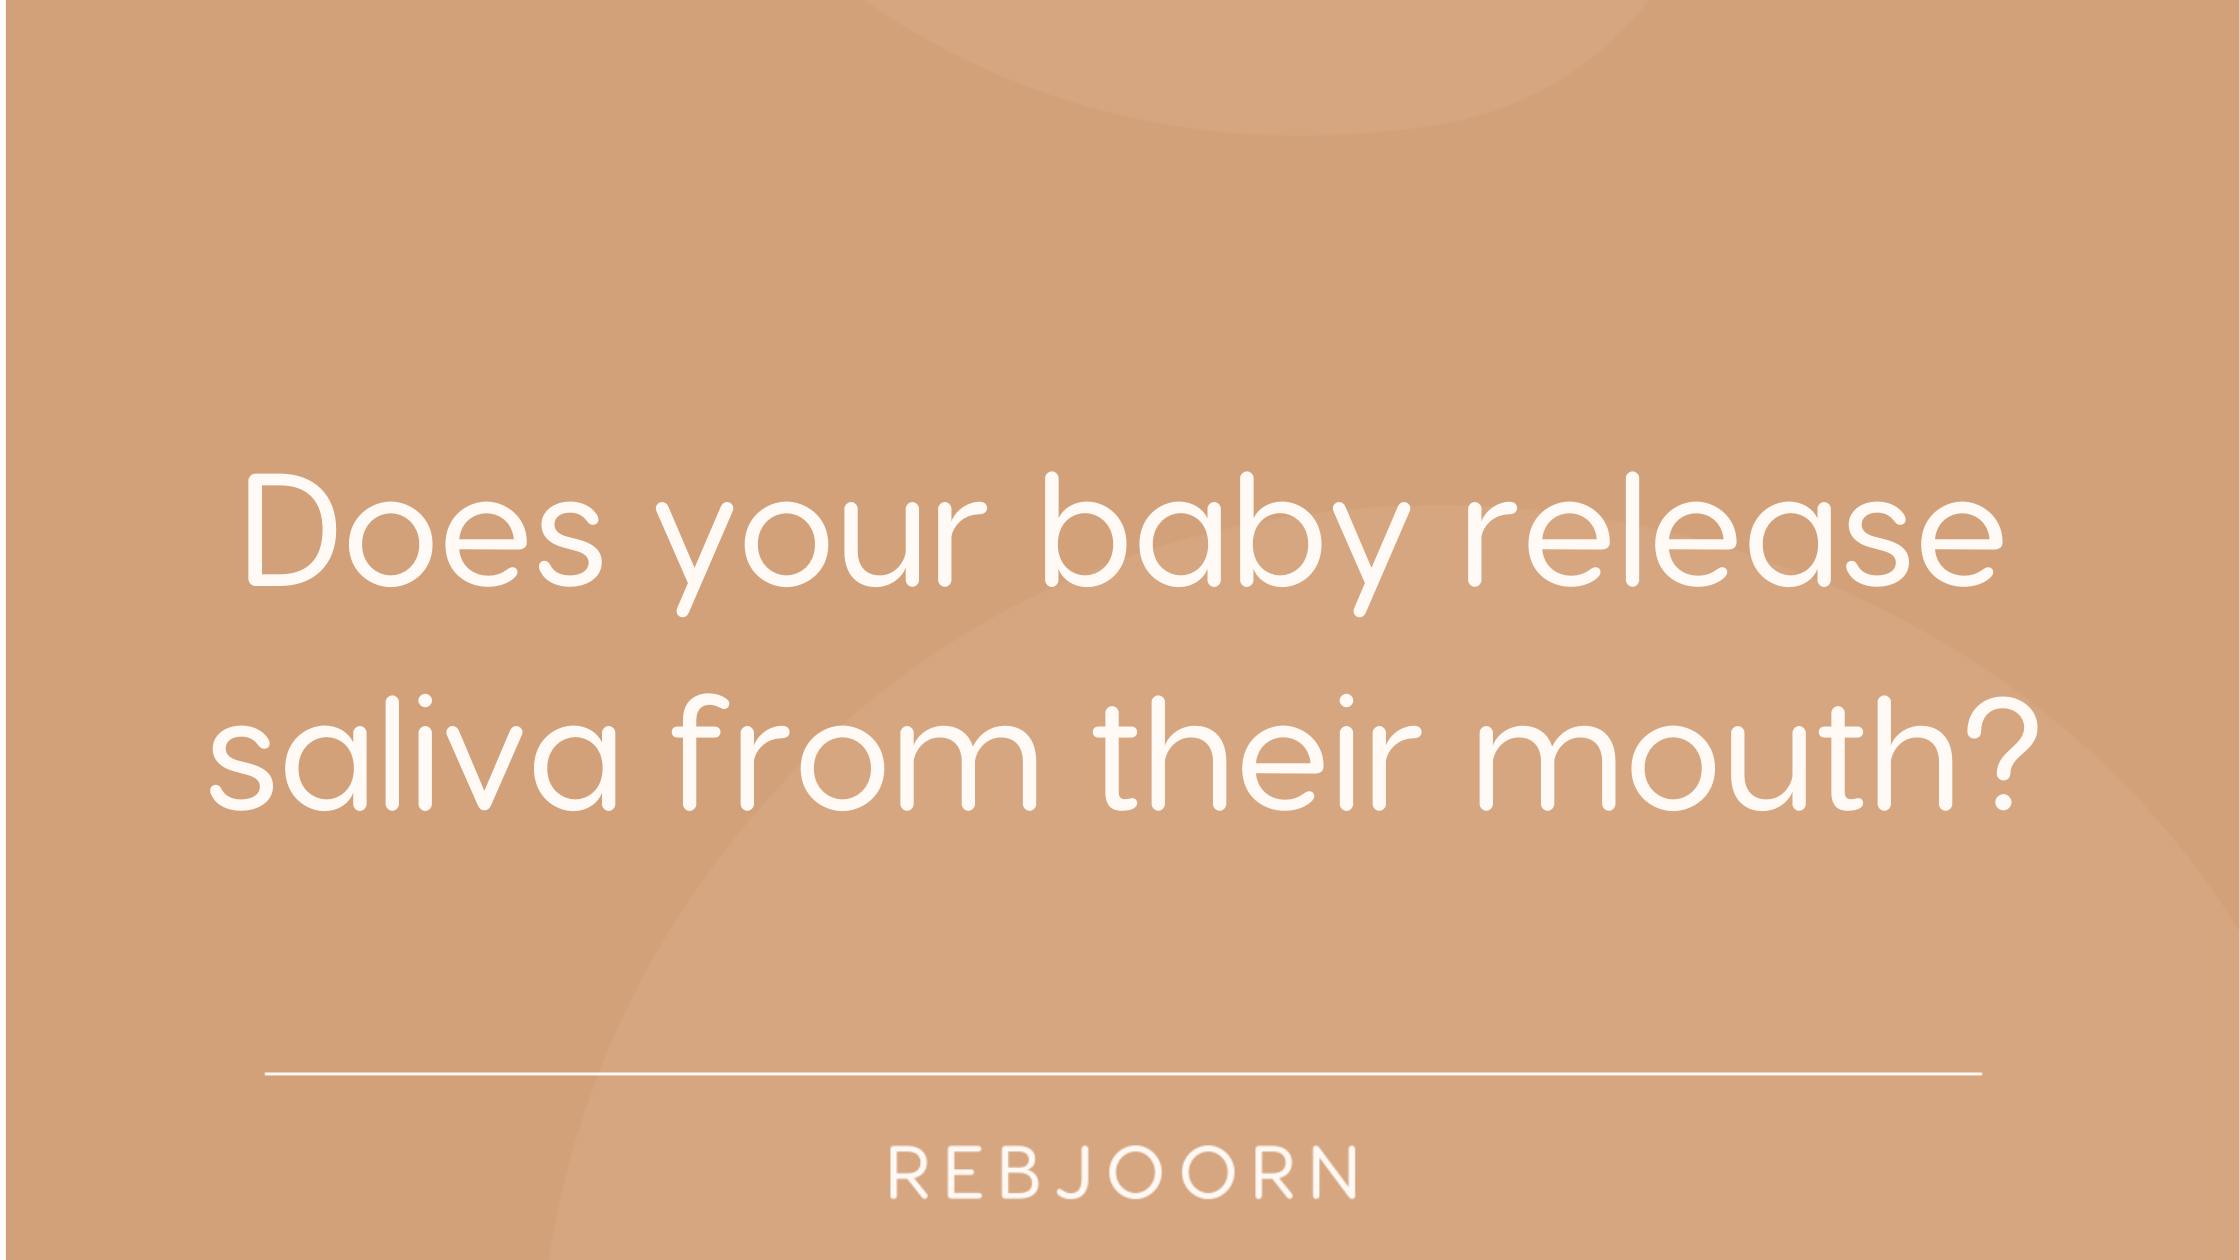 Does your baby release saliva from their mouth?